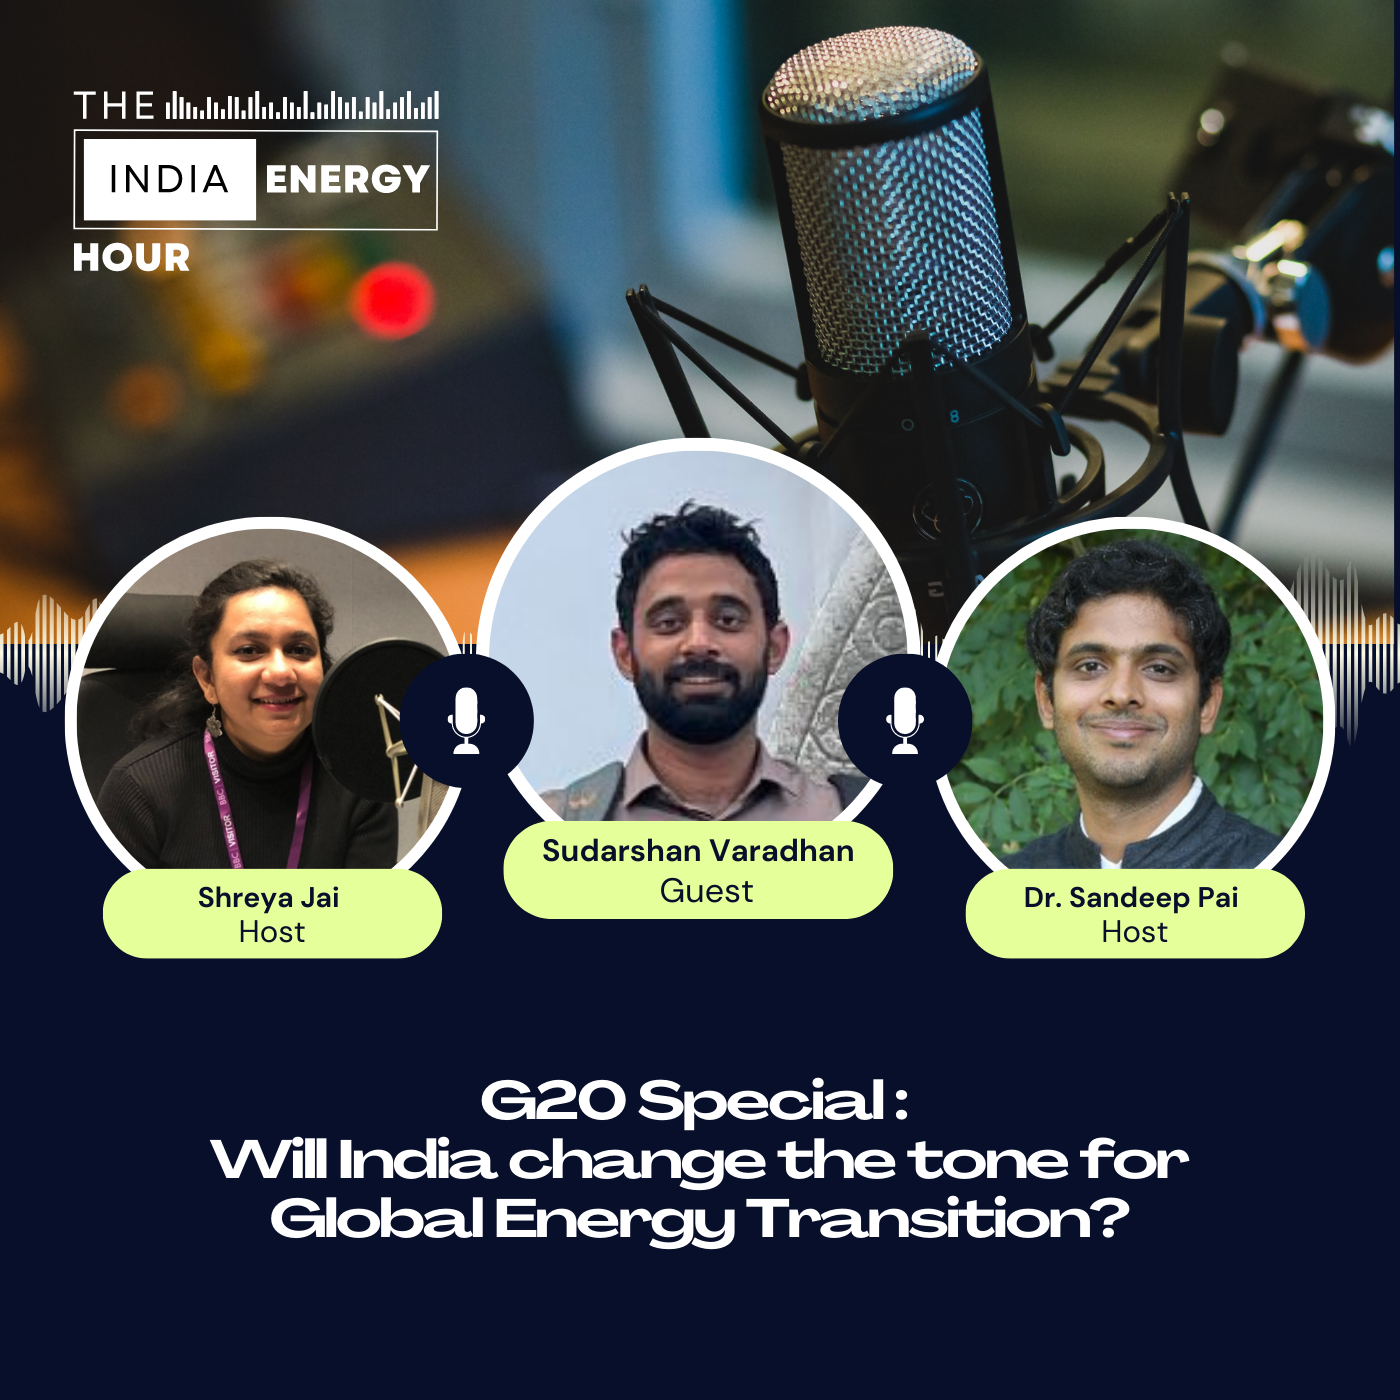 G20 Special: Will India change the tone for Global Energy Transition?